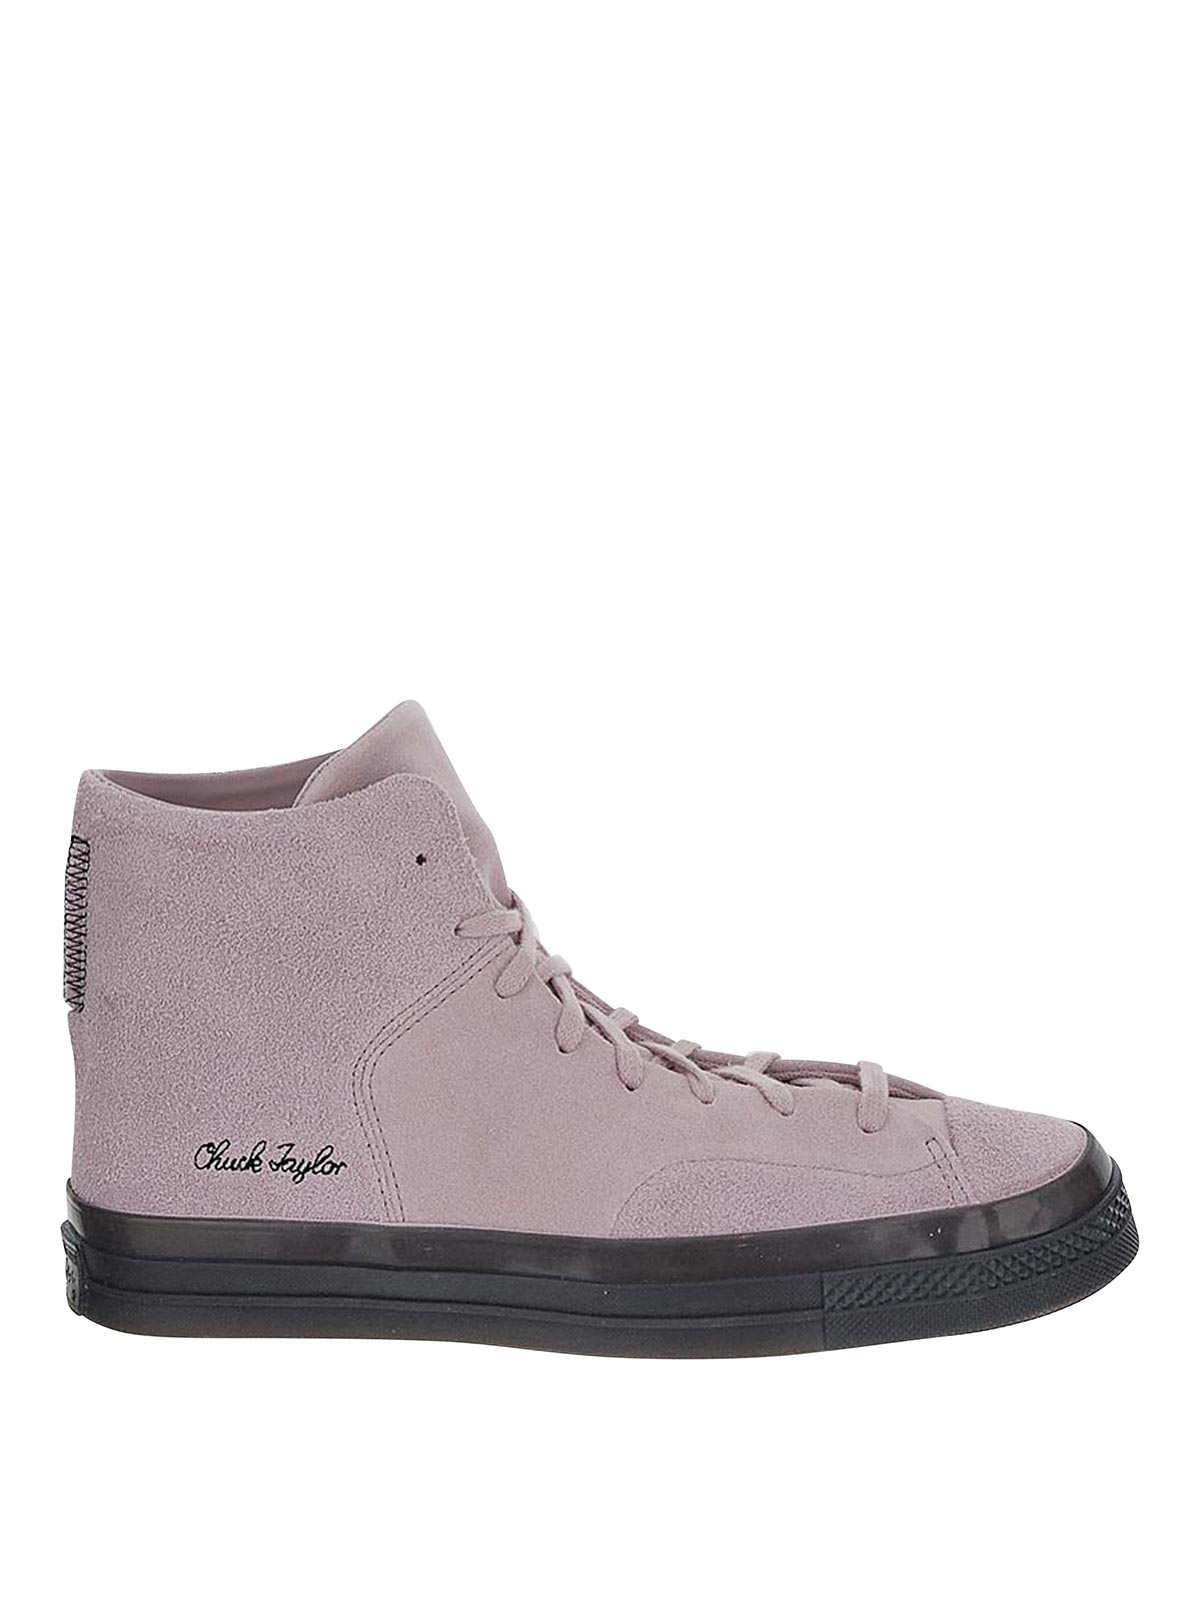 Converse High Top Sneakers In Violet With Lace Up In Purple